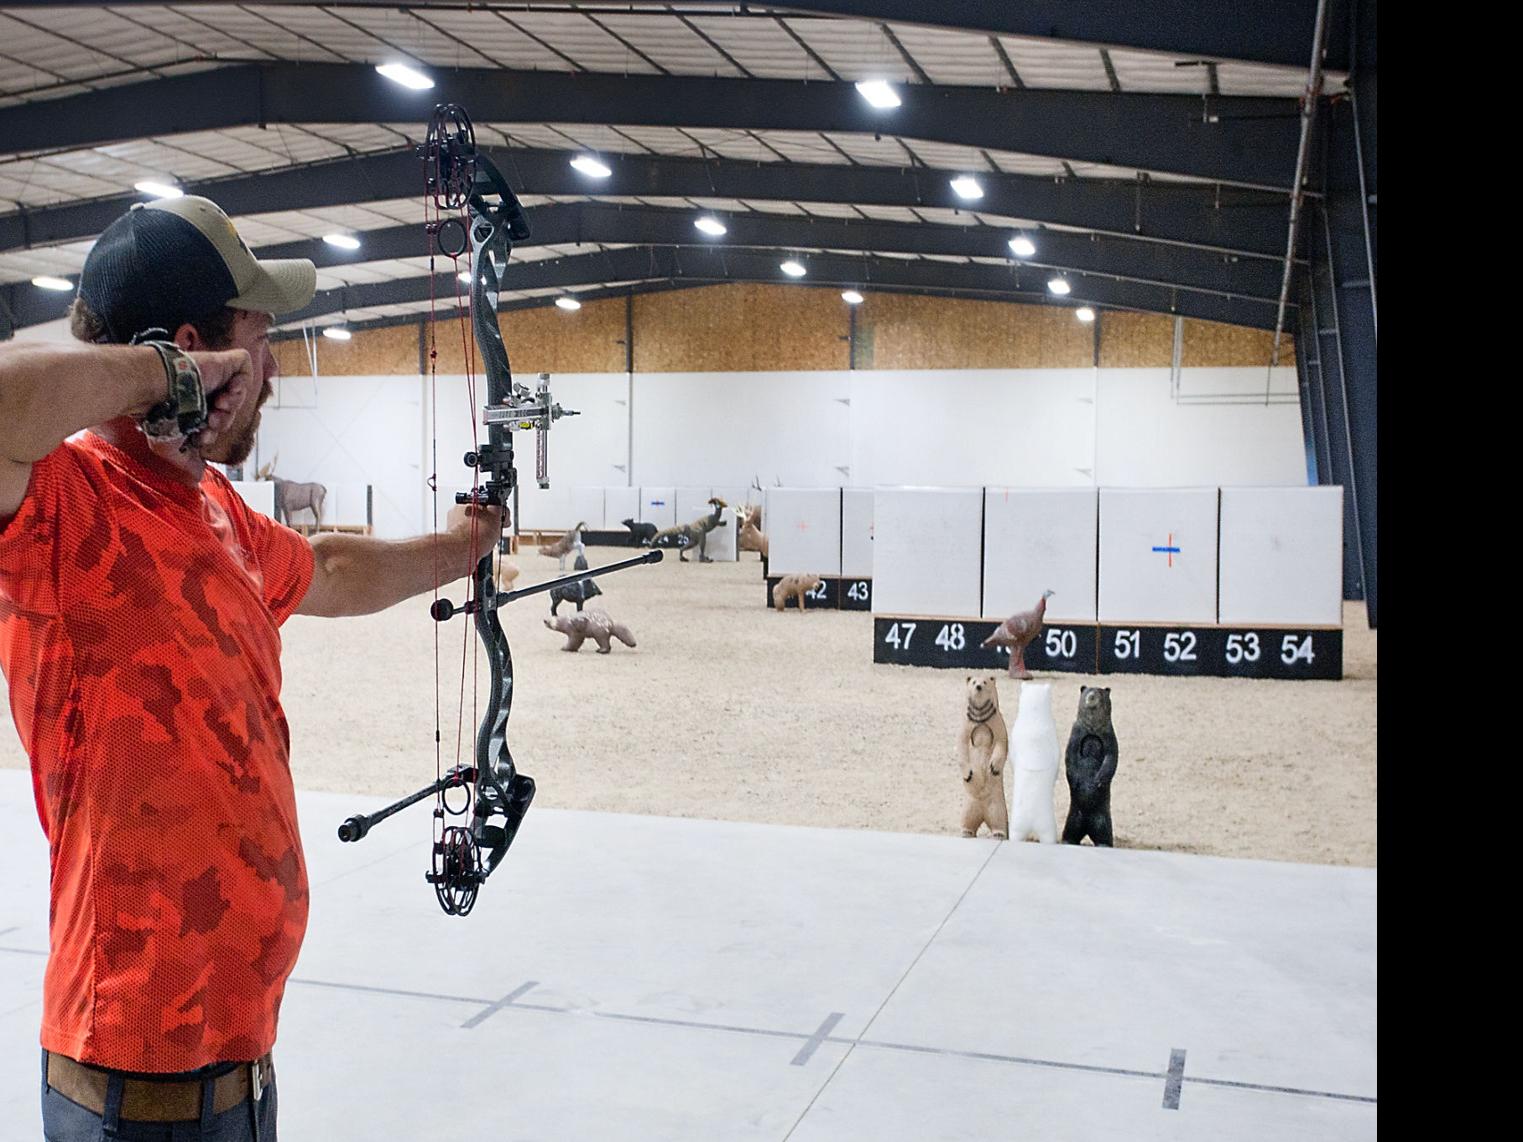 Endless Archery New Indoor Archery Center Opens In Nampa Local News Idahopress Com